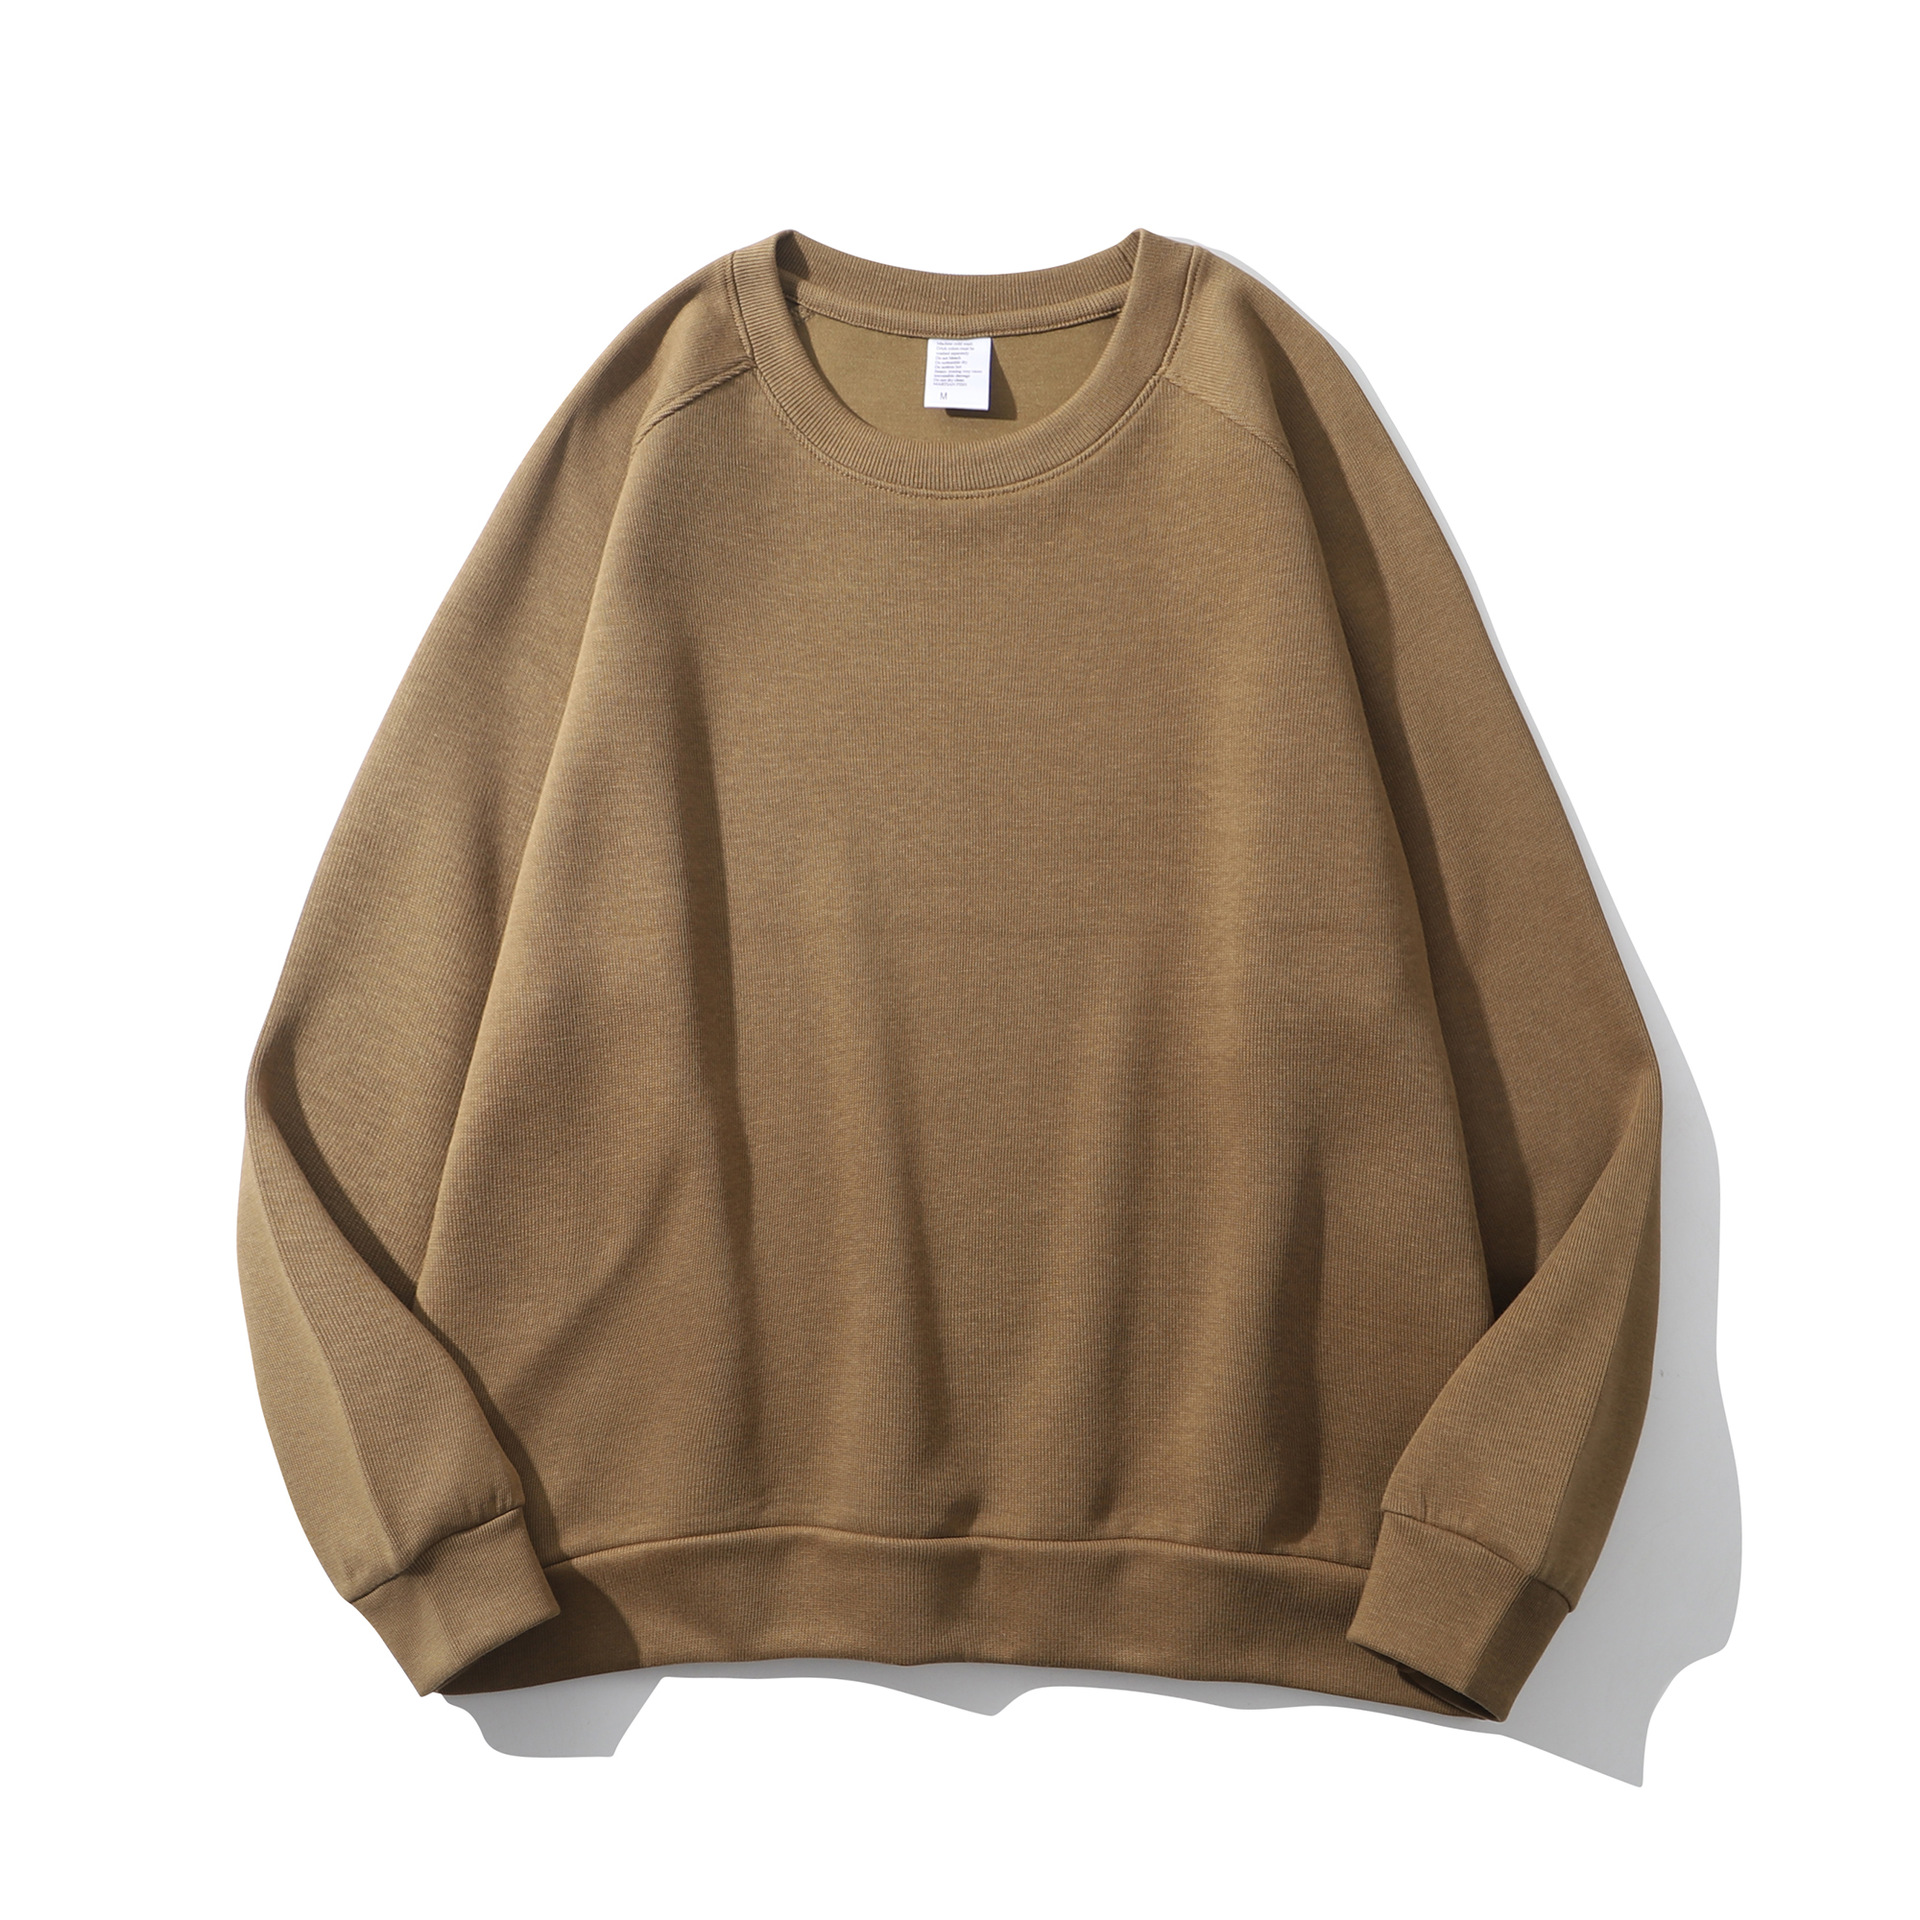 350G Cotton Knitted Raglan Loose round Neck Sweater for Men and Women Oversize Solid Color Wide Version Sweater Base Shirt